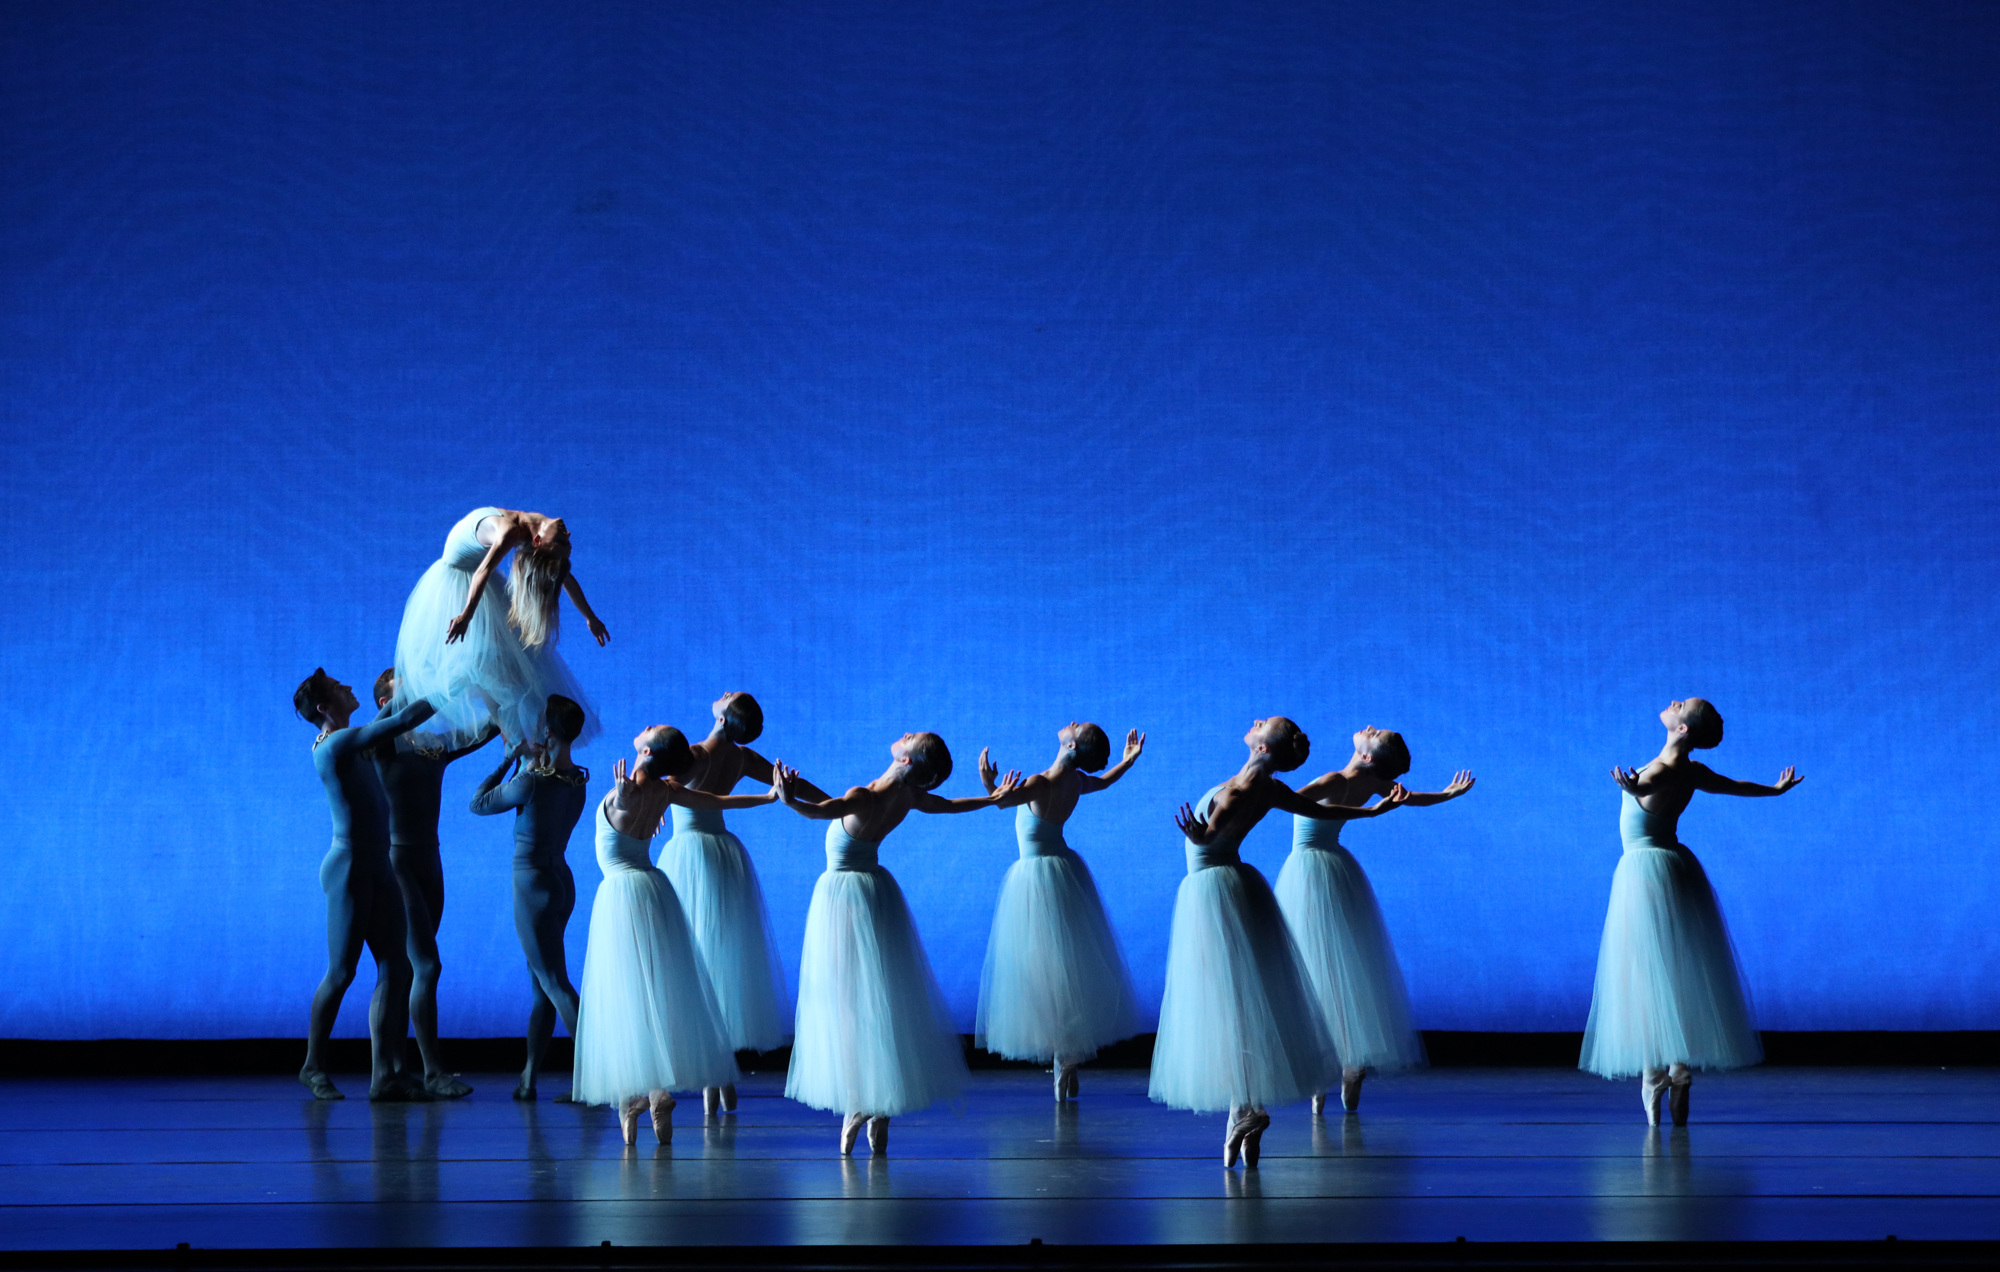 The Sarasota Ballet opened their final program of the season with George Balanchine's 